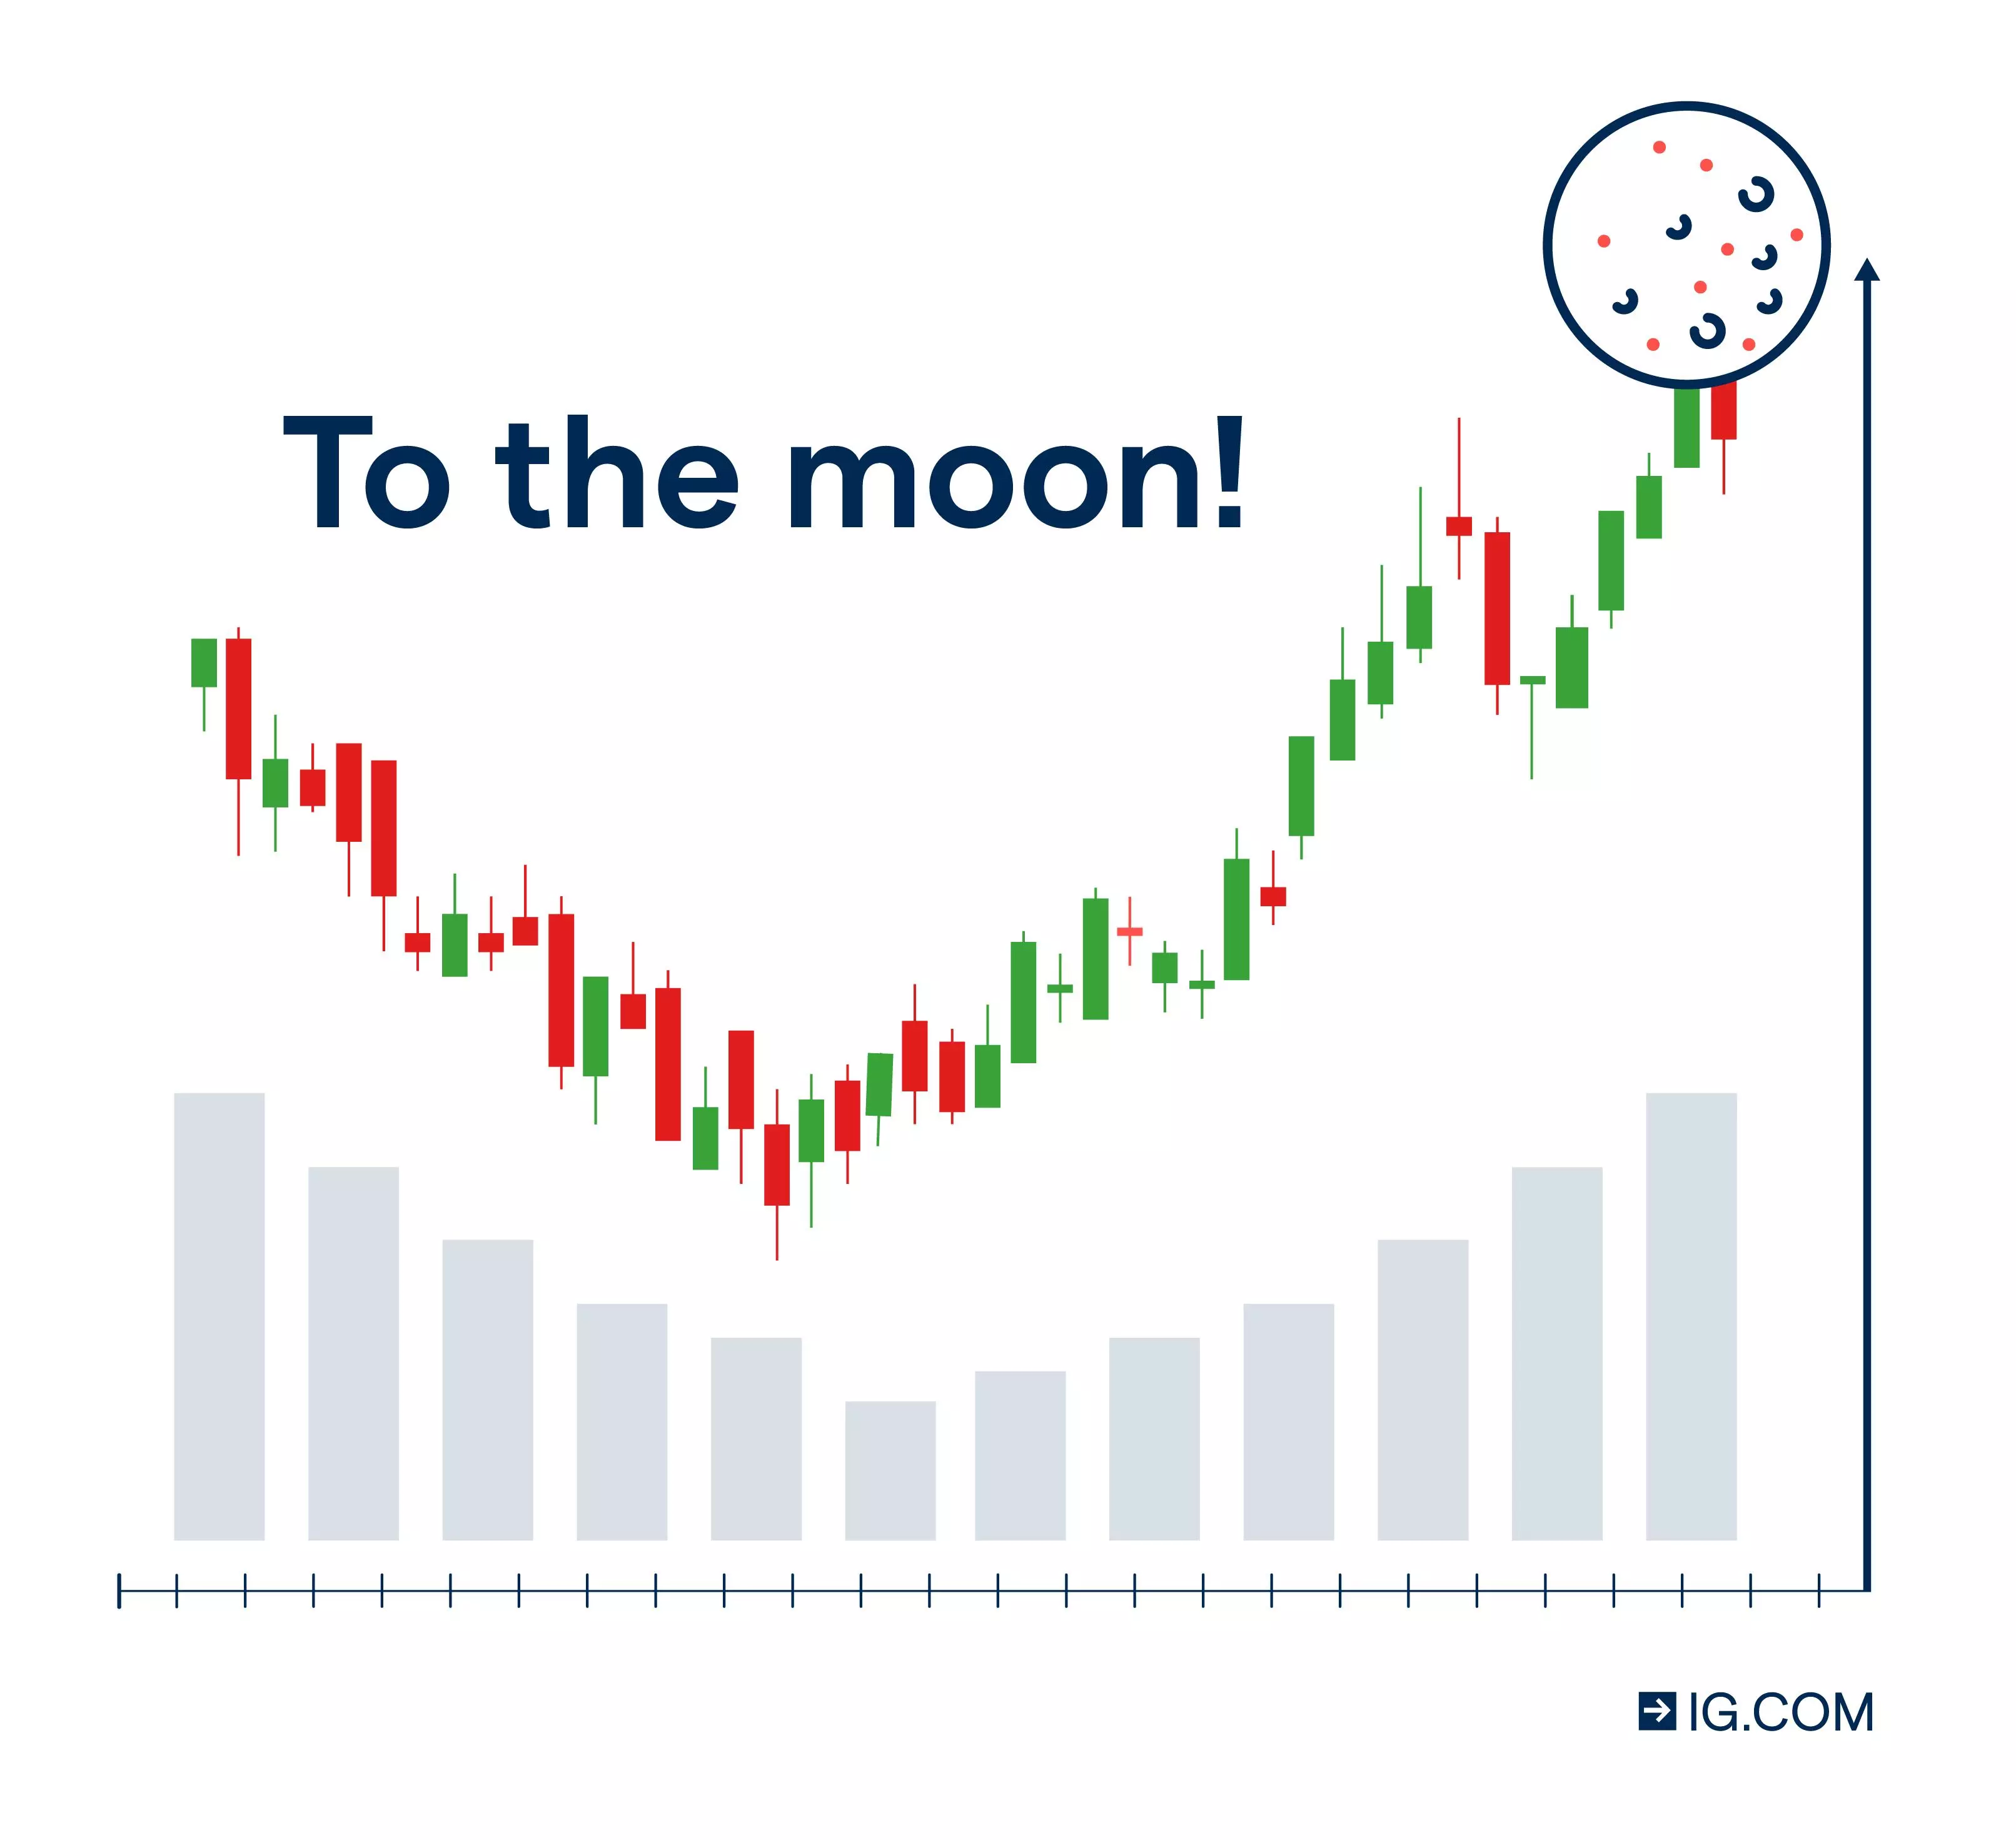 To the moon image